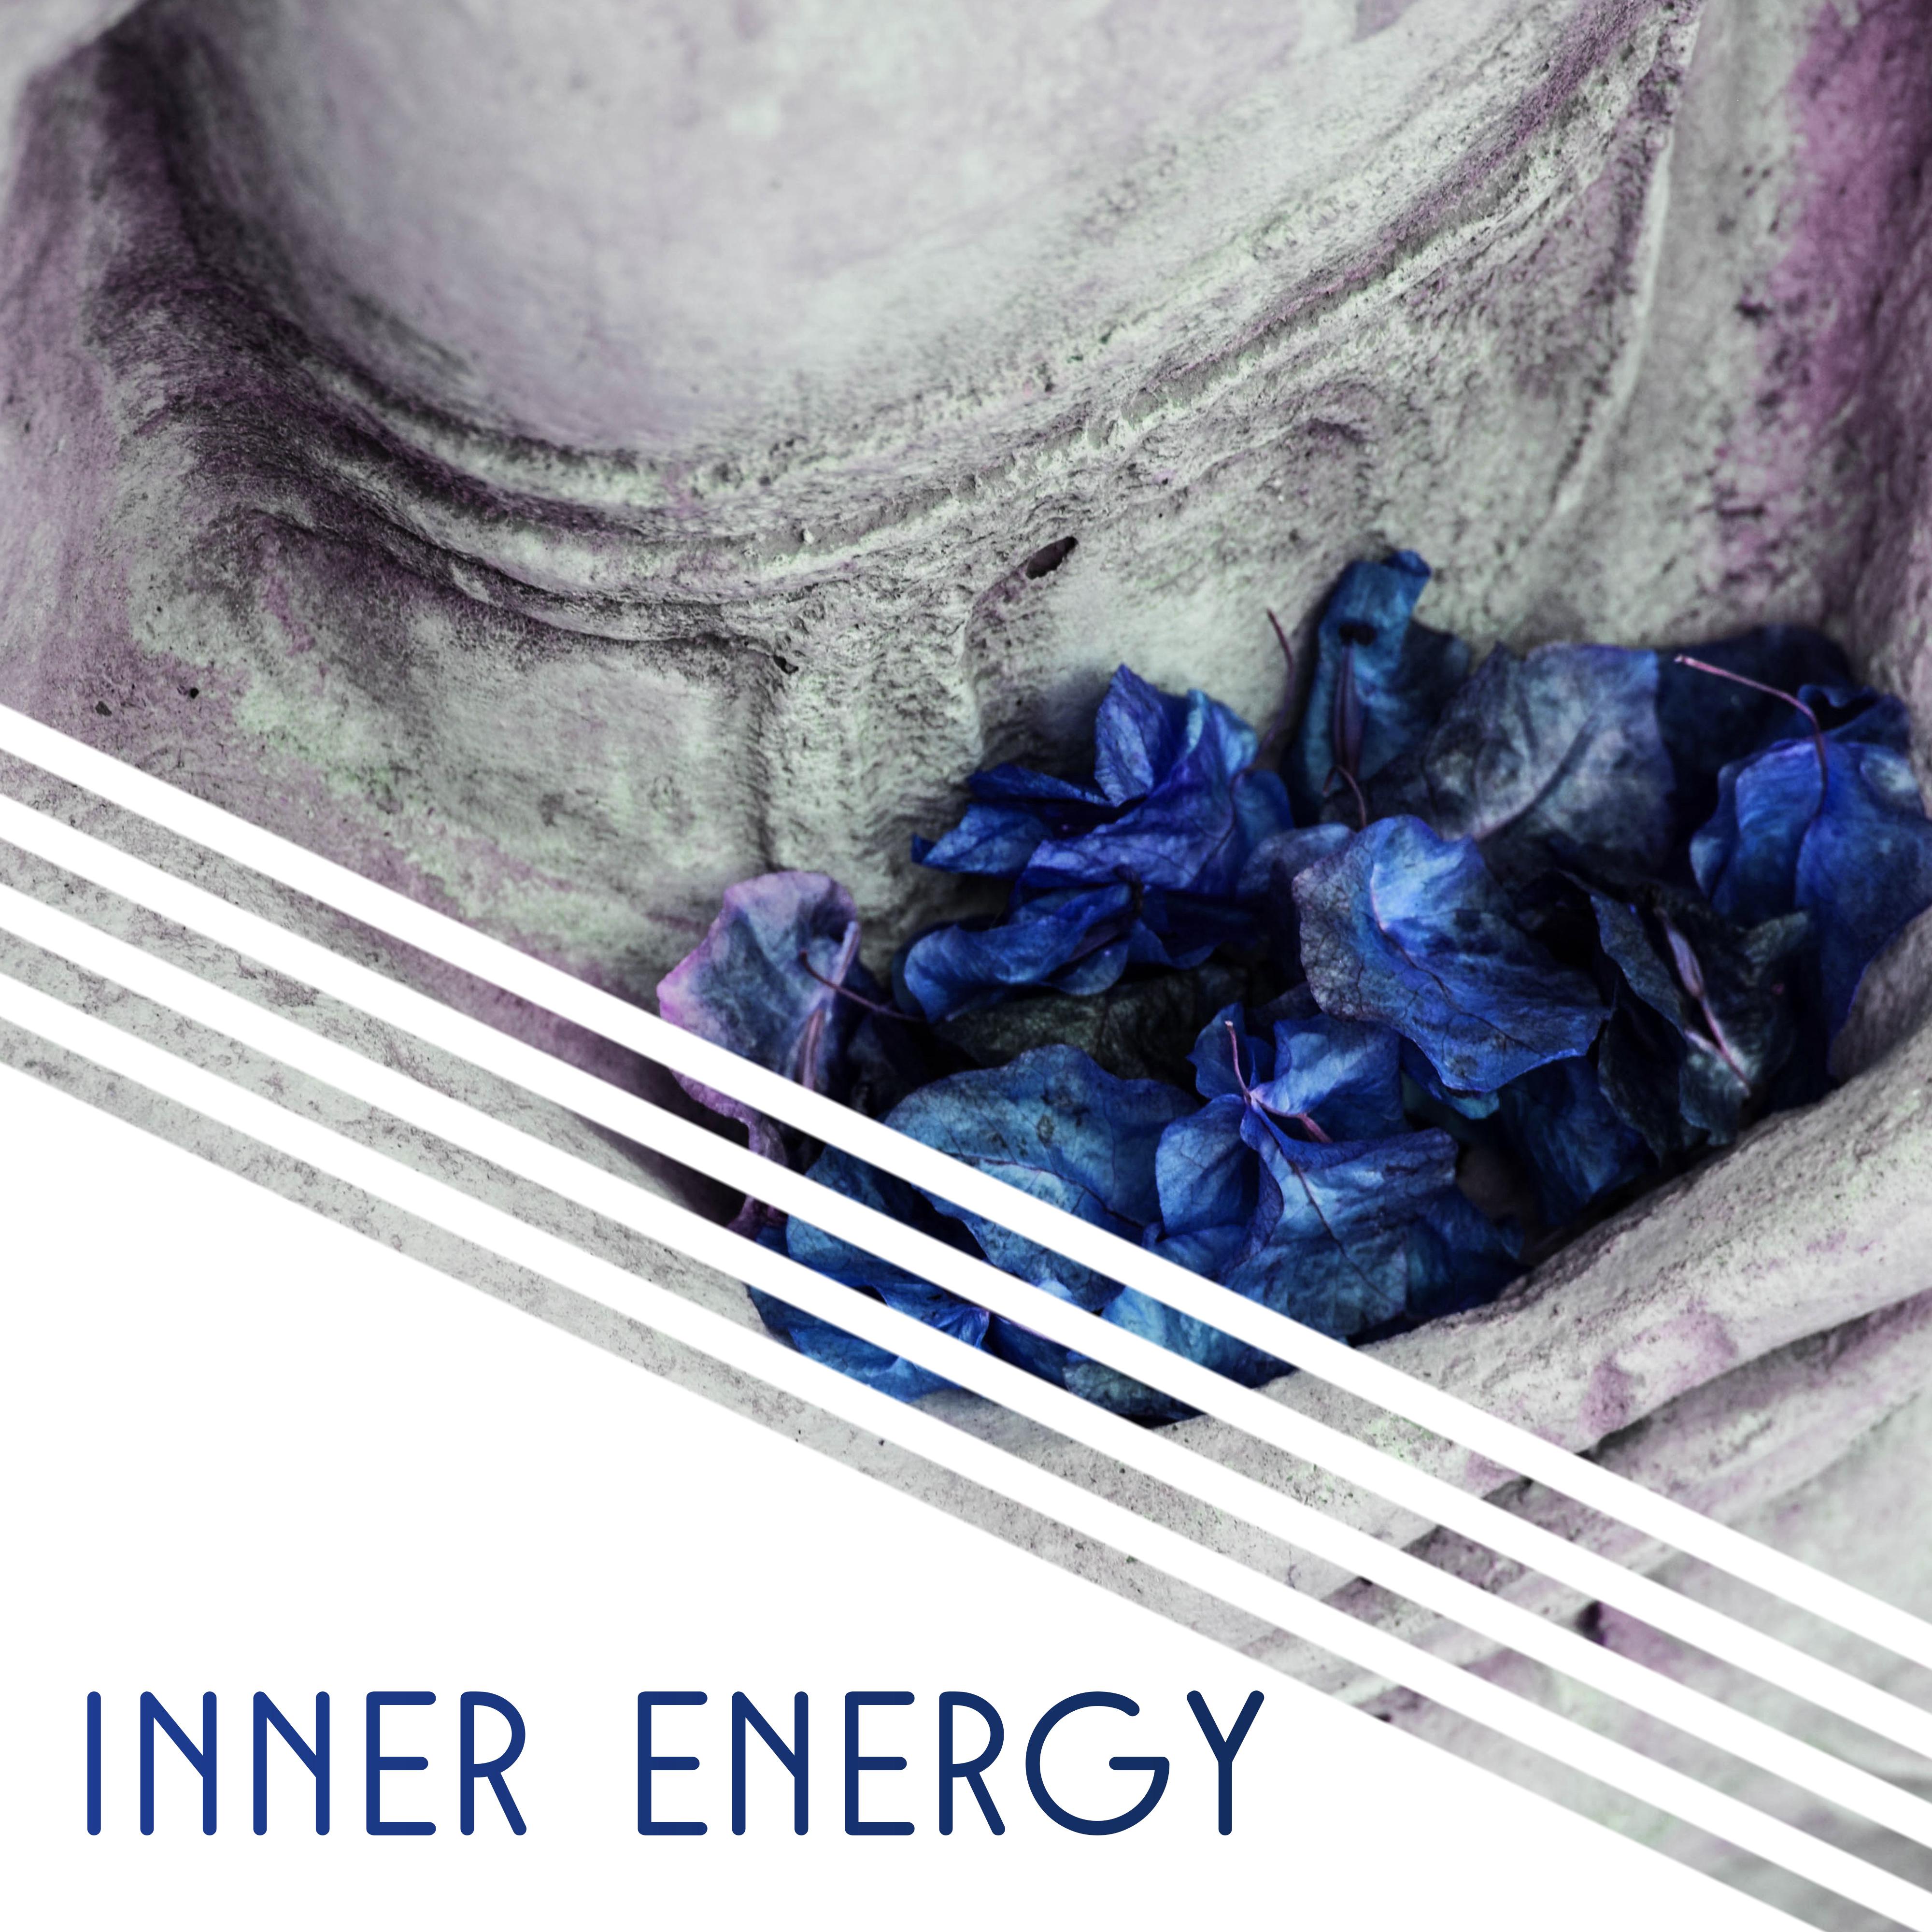 Inner Energy  Meditation Music, Sounds of Yoga, Deep Concentration, Zen, Relief, Relaxation, Peaceful Mind, Yoga Dream